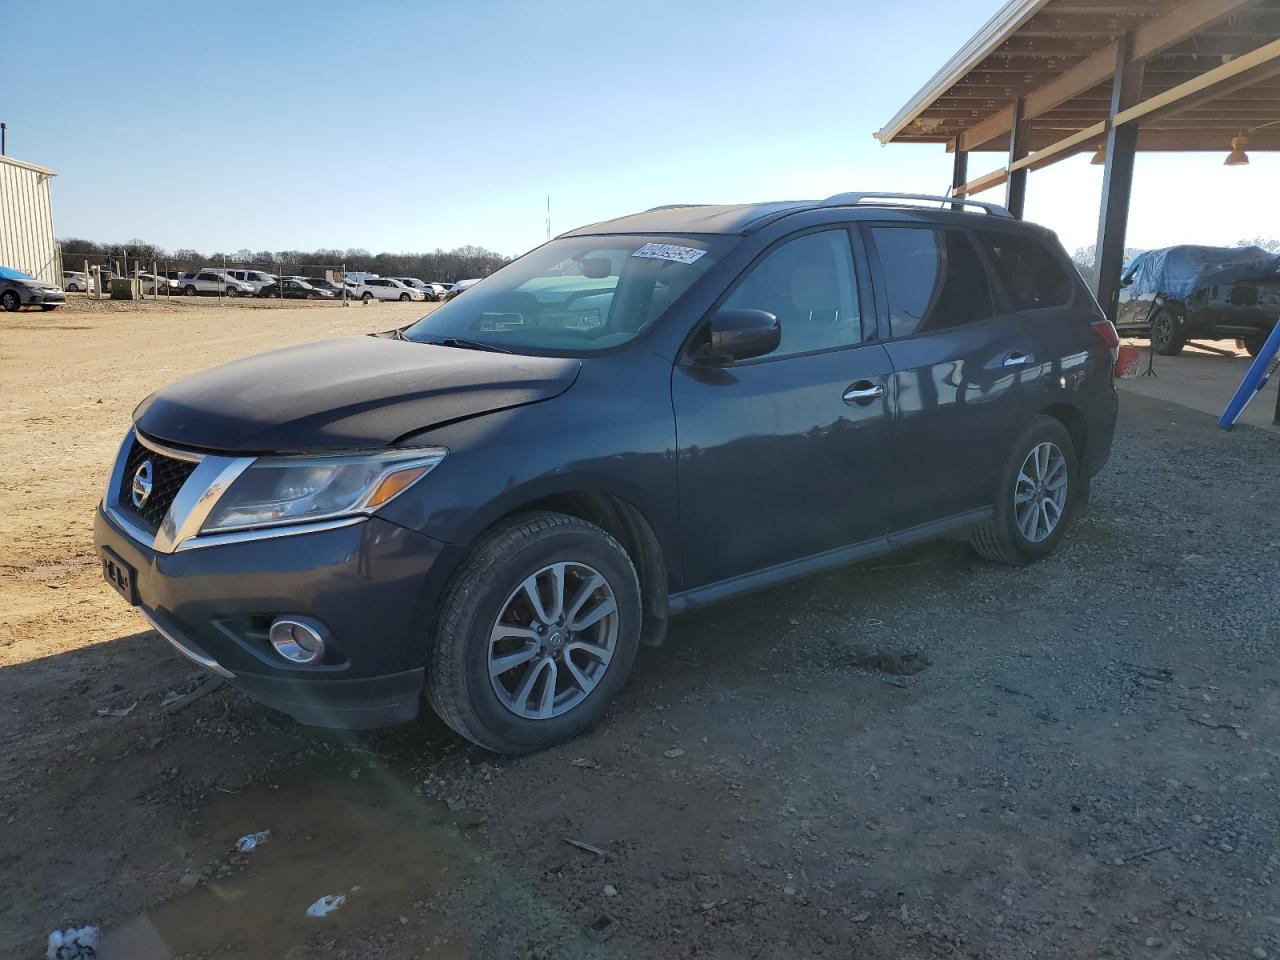 5N1AR2MM3GC****** Salvage and Wrecked 2016 Nissan Pathfinder in AL - Tanner